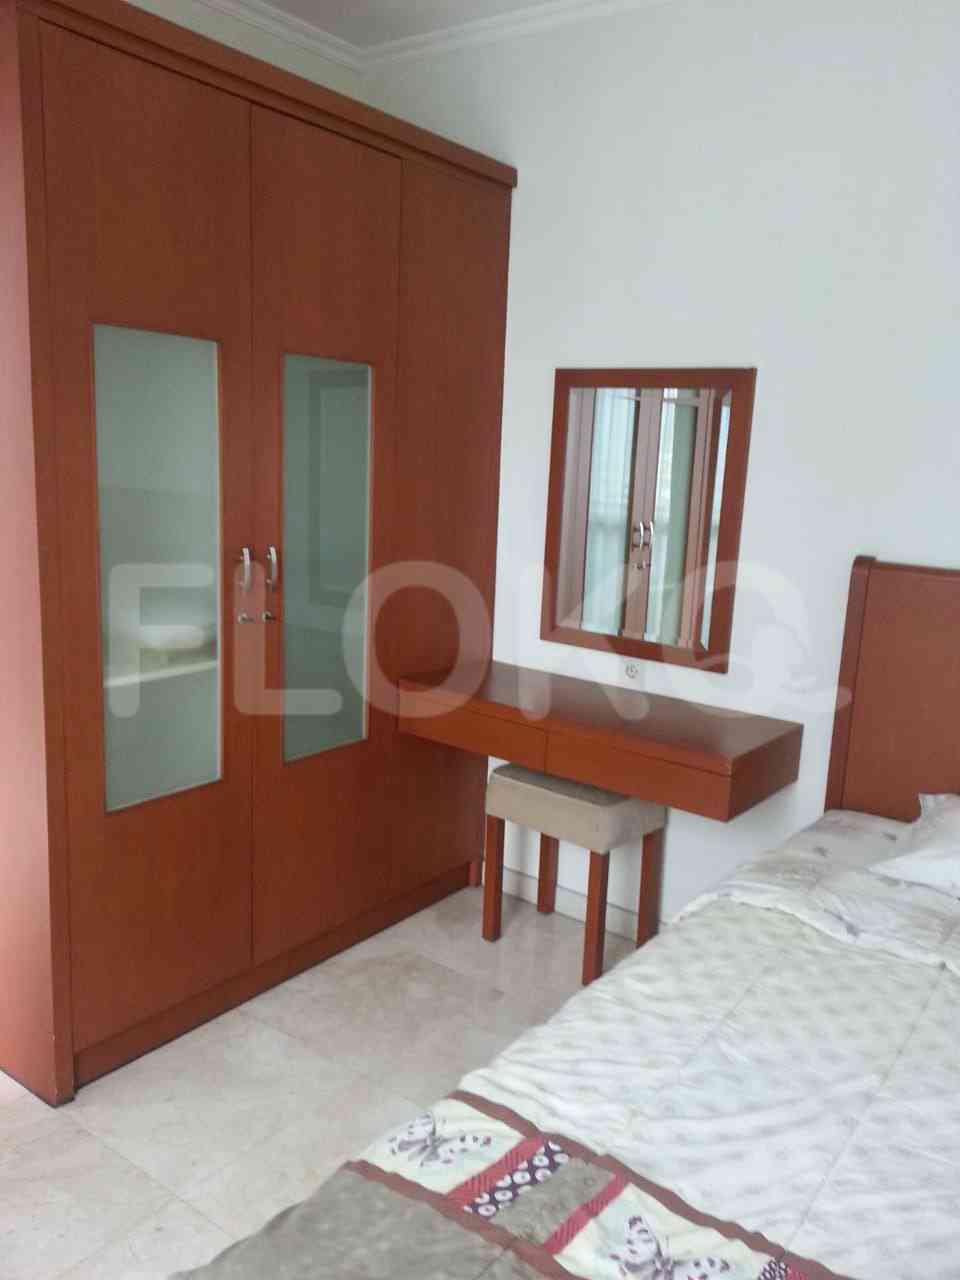 3 Bedroom on 8th Floor for Rent in Bellagio Residence - fkuffb 6